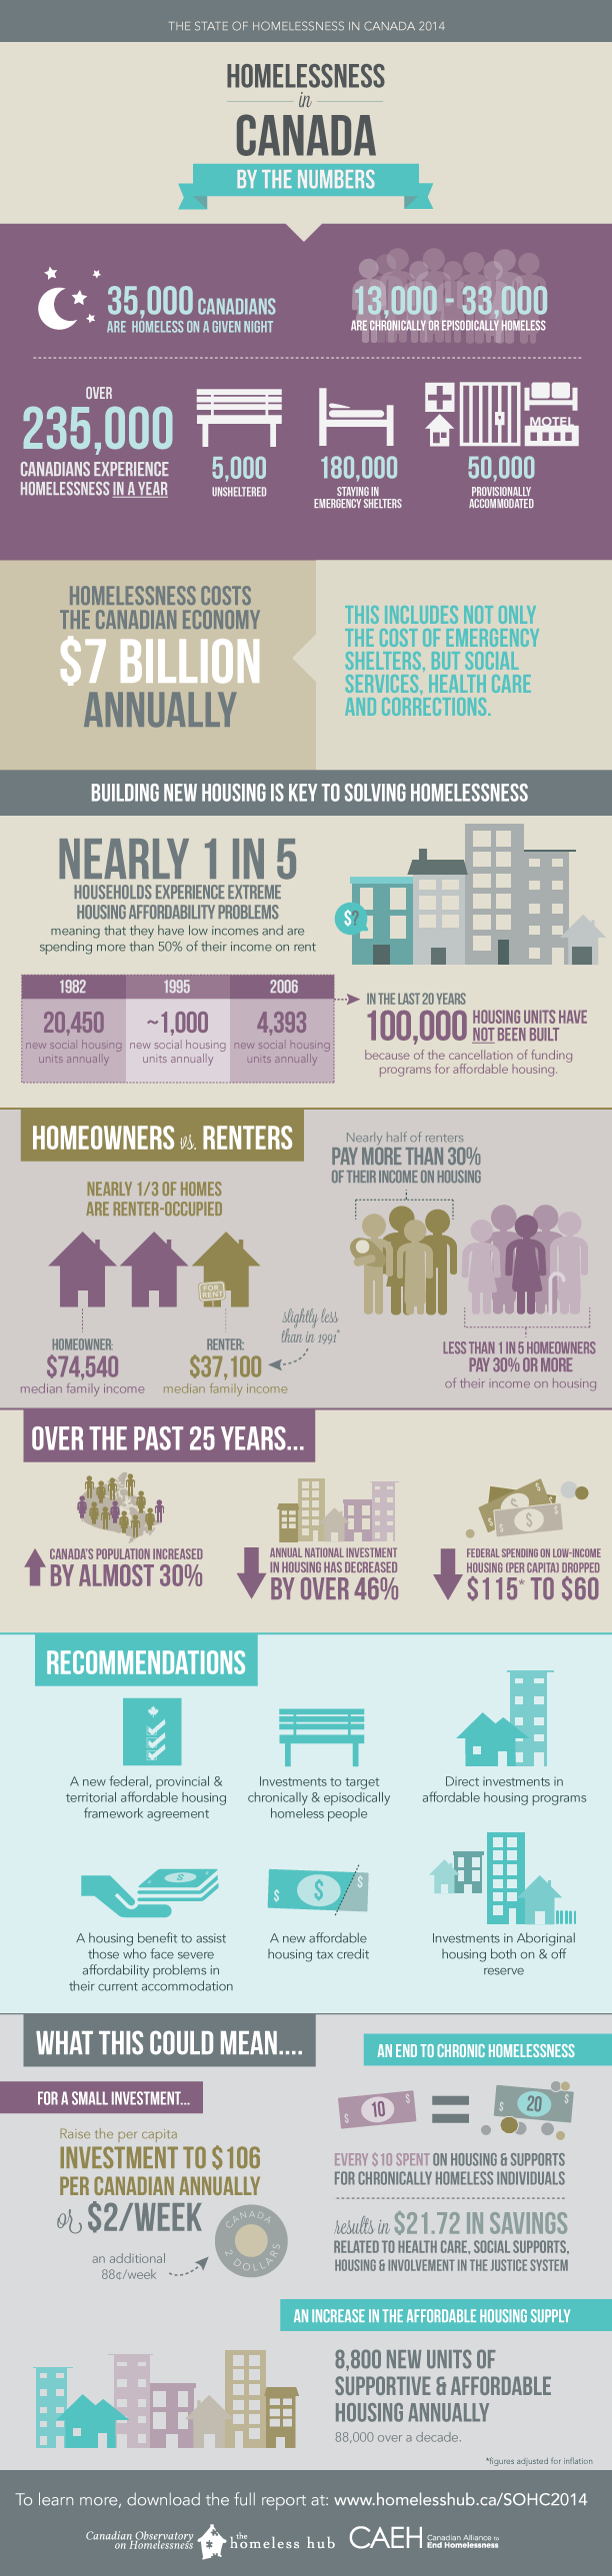 Homelessness in Canada by the Numbers Infographic